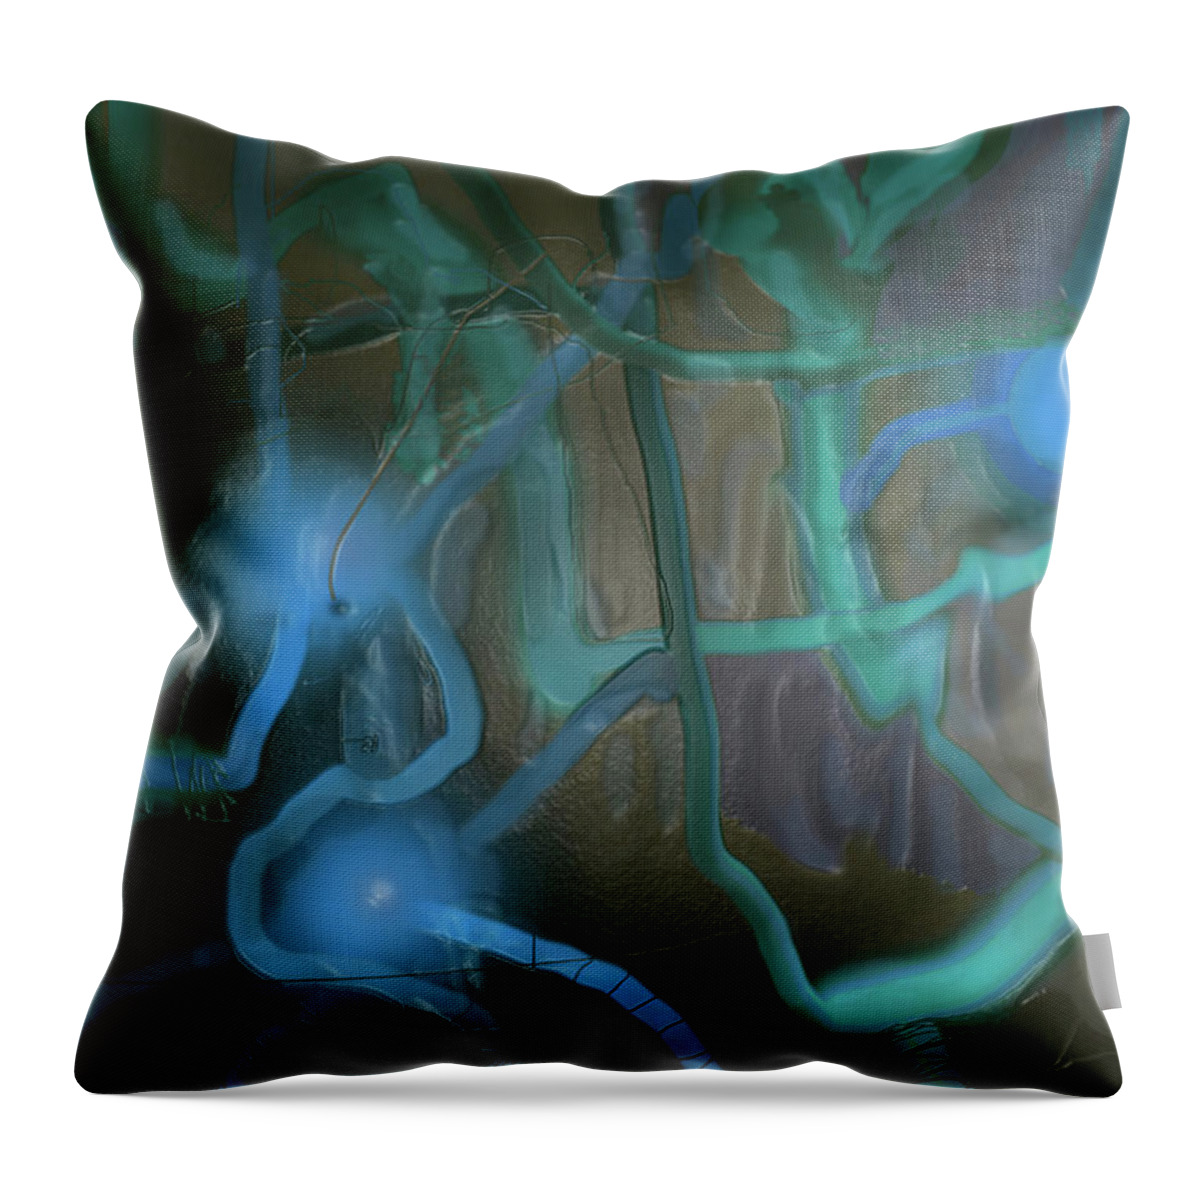 Blue Throw Pillow featuring the photograph Blue Two by Ian MacDonald